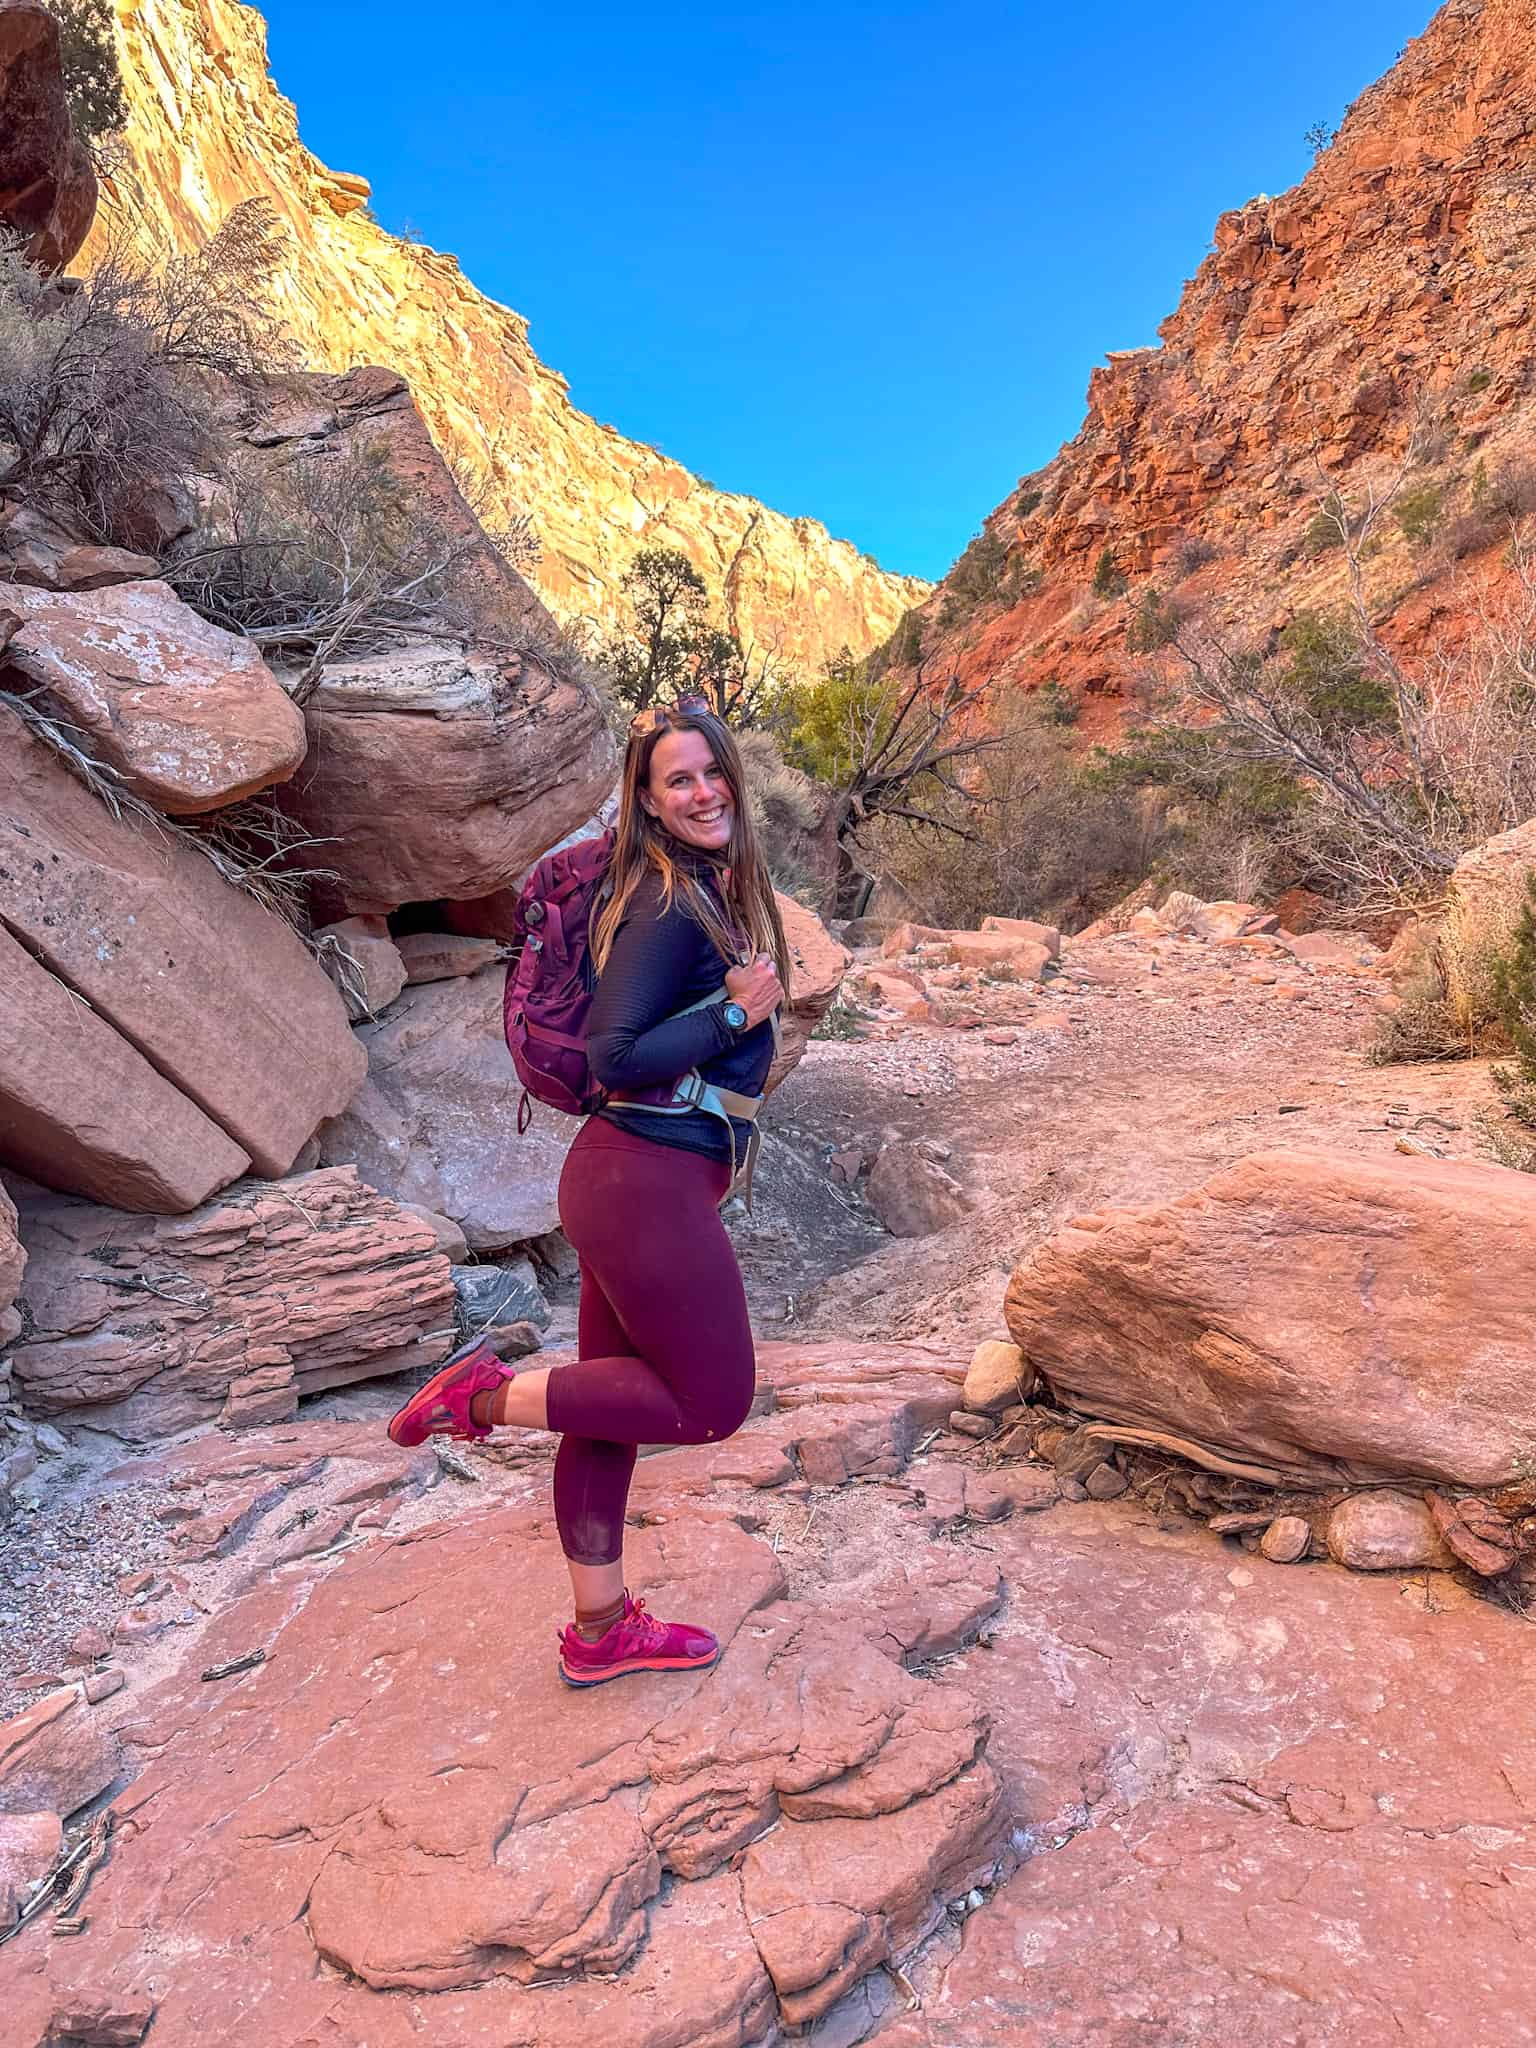 Woman flicking her leg back while wearing hot pink trail runners in a canyon.